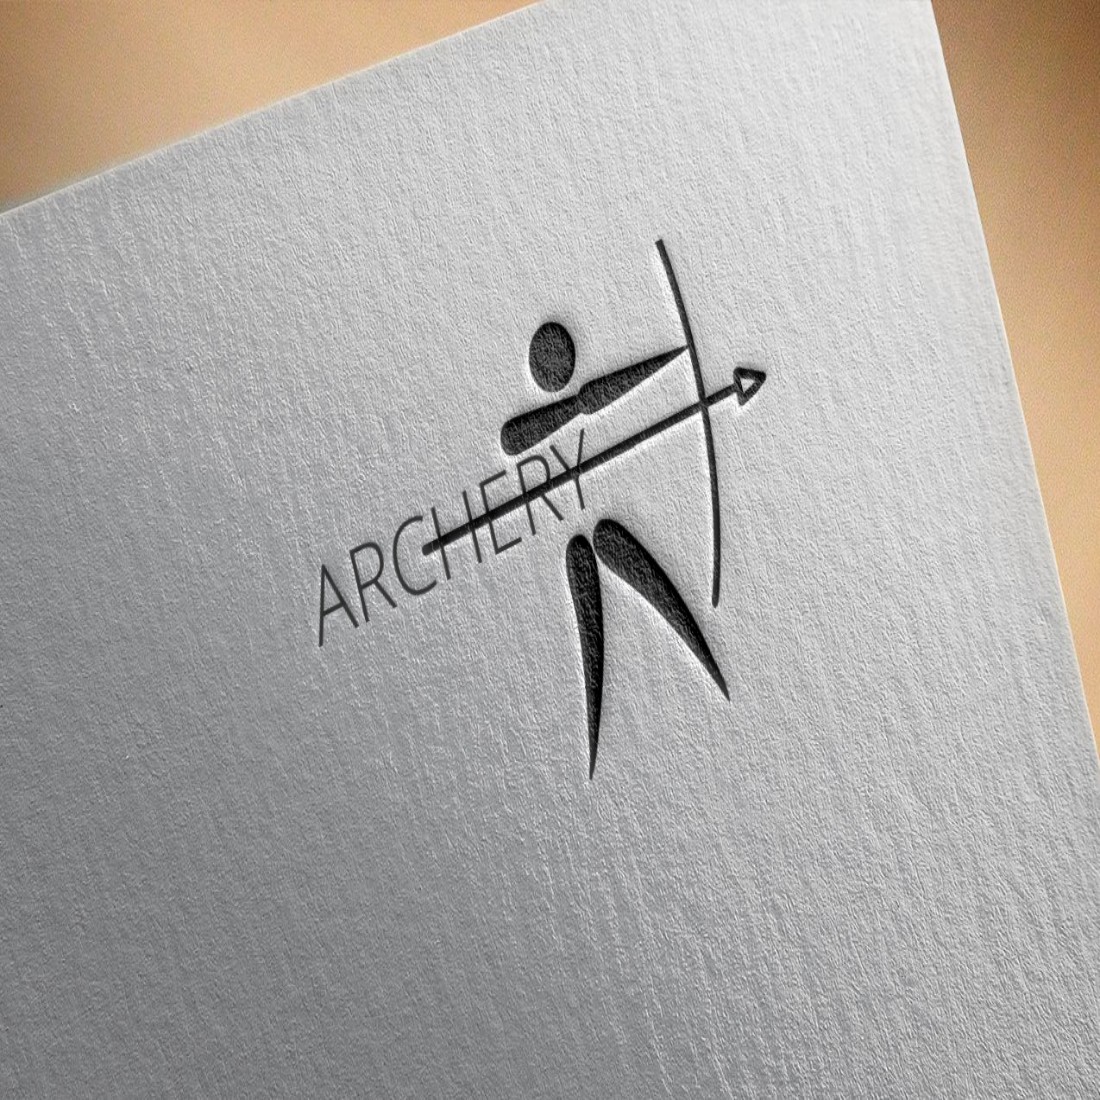 Archery Logo Design mockup example preview.